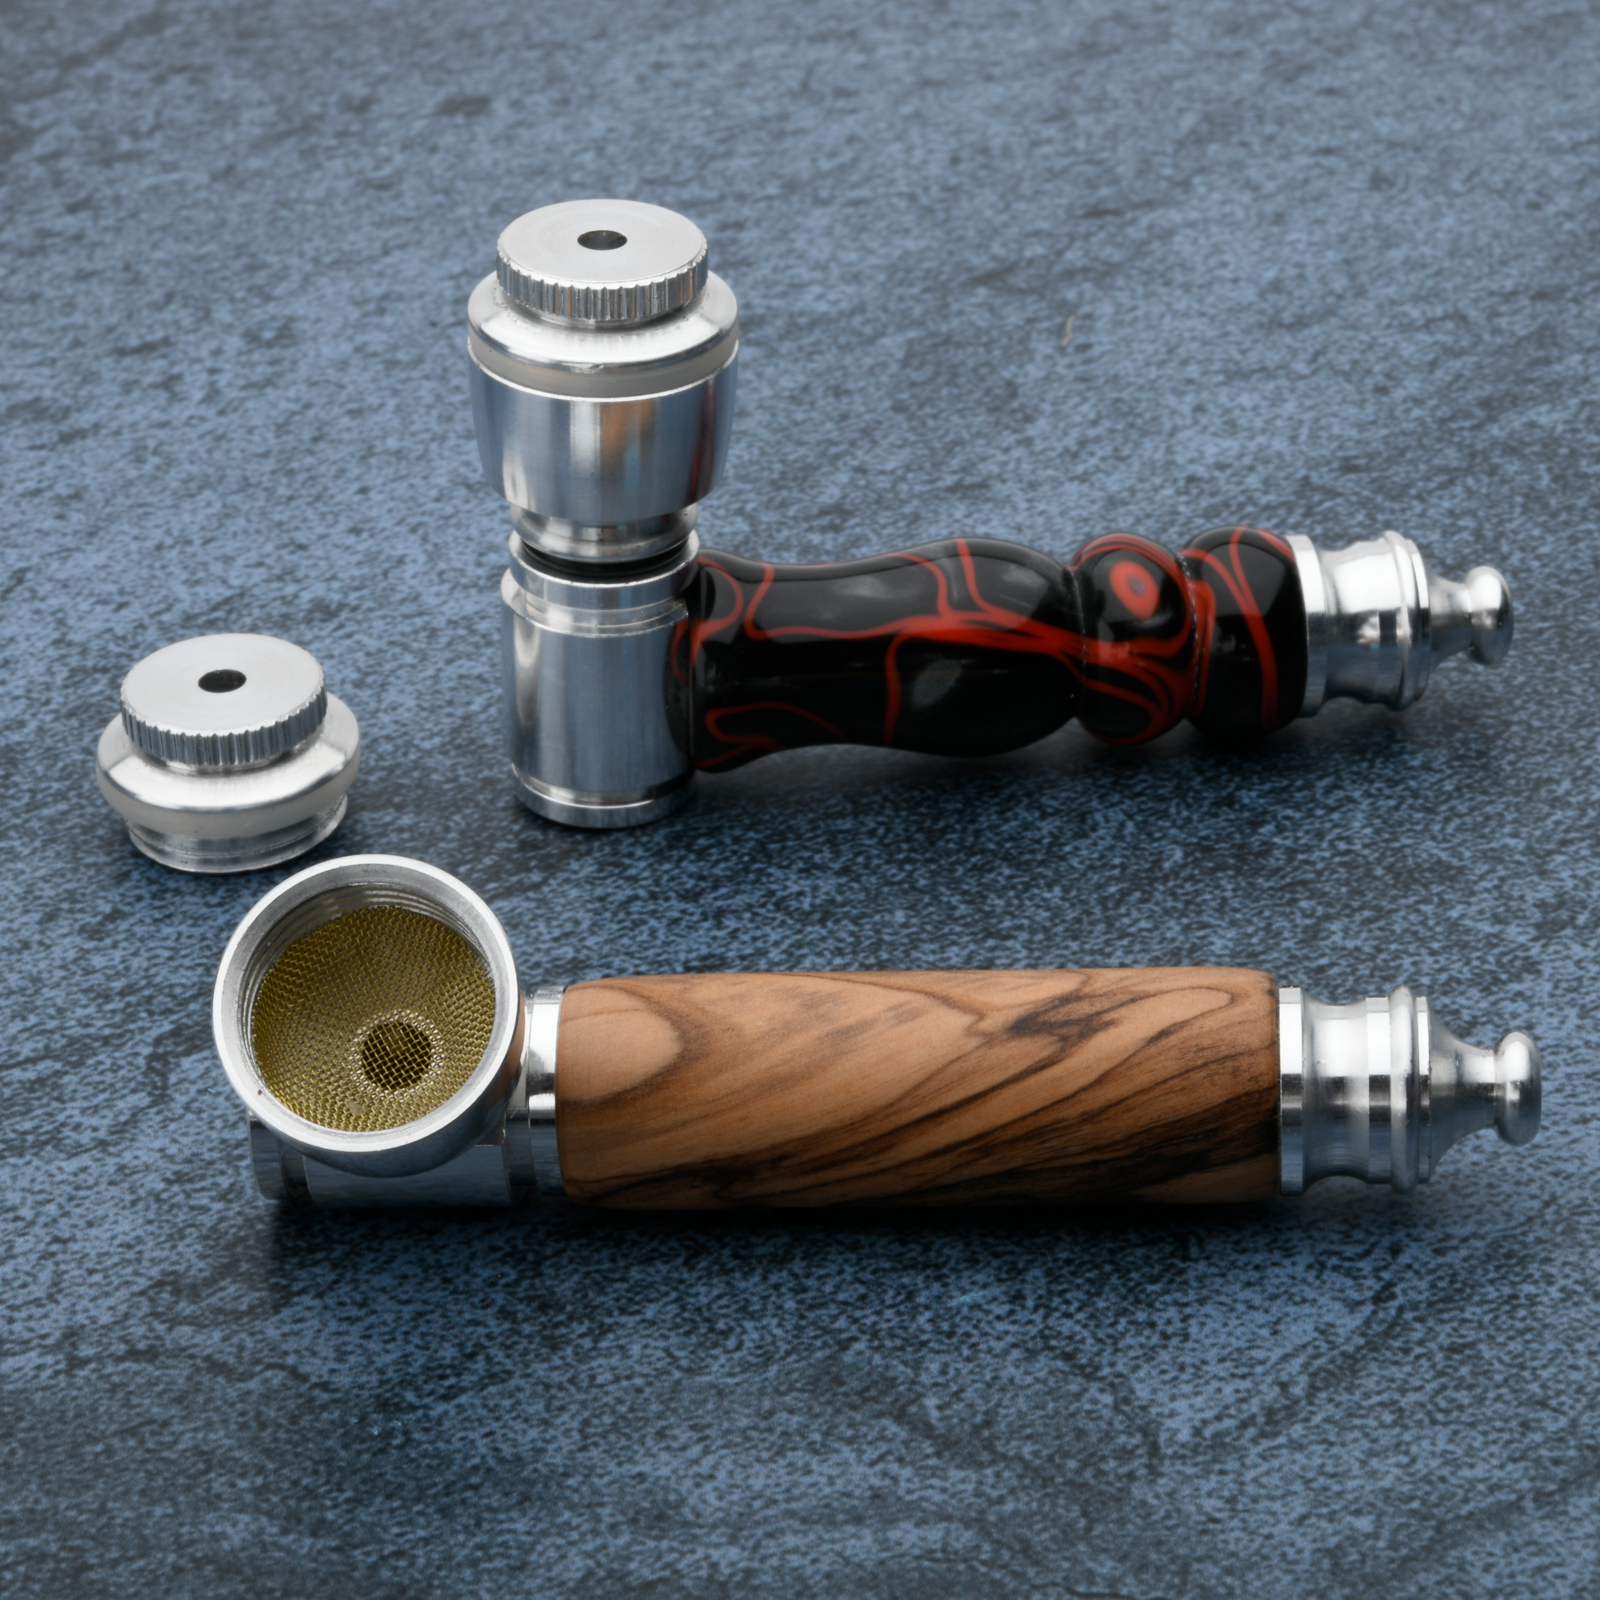 Must-Have Pipe-Smoking Accessories